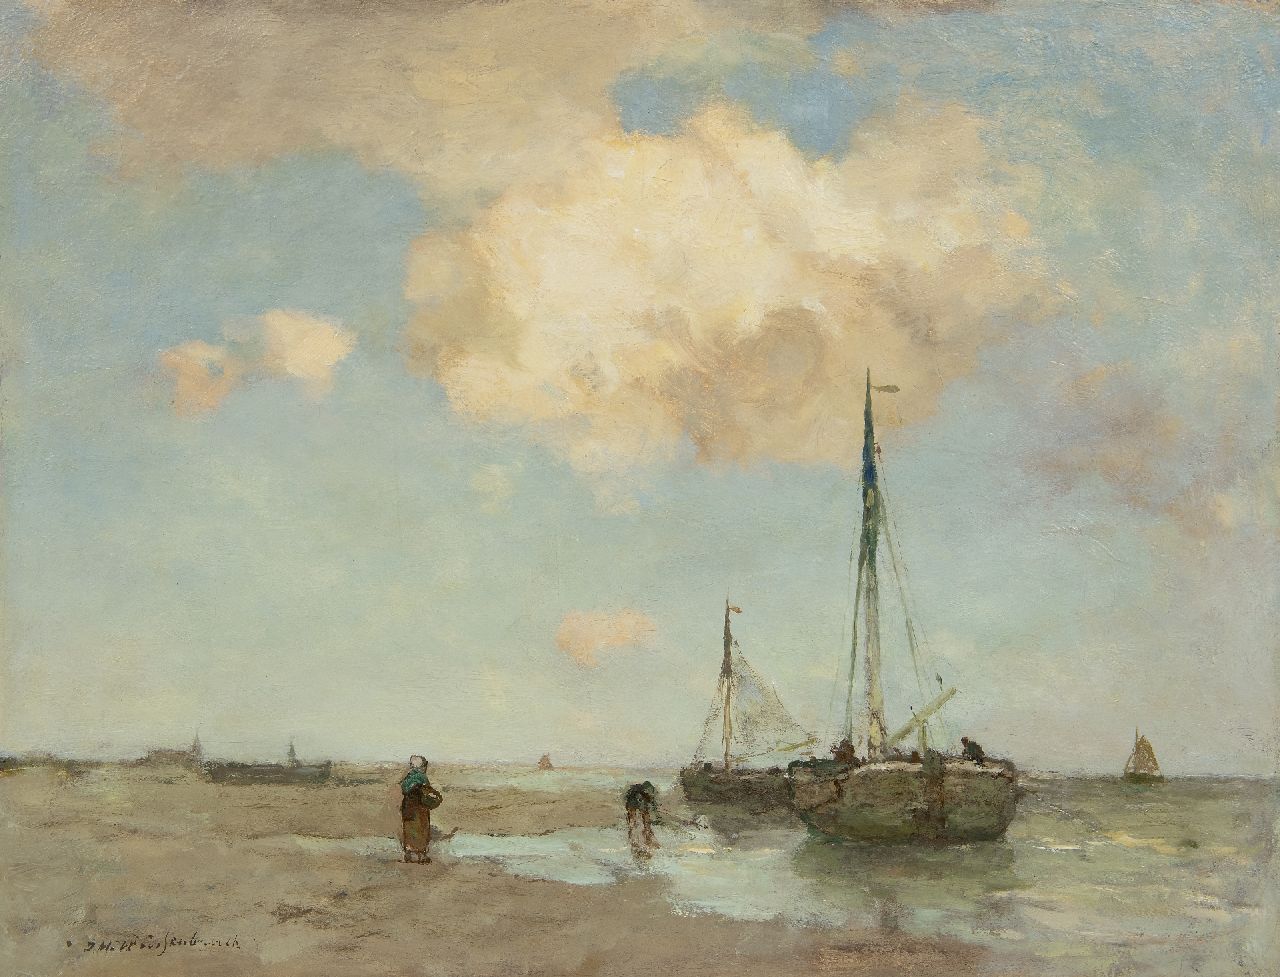 Weissenbruch H.J.  | Hendrik Johannes 'J.H.' Weissenbruch | Paintings offered for sale | Fishing boats on the tide line, oil on canvas 38.9 x 50.9 cm, signed l.l.